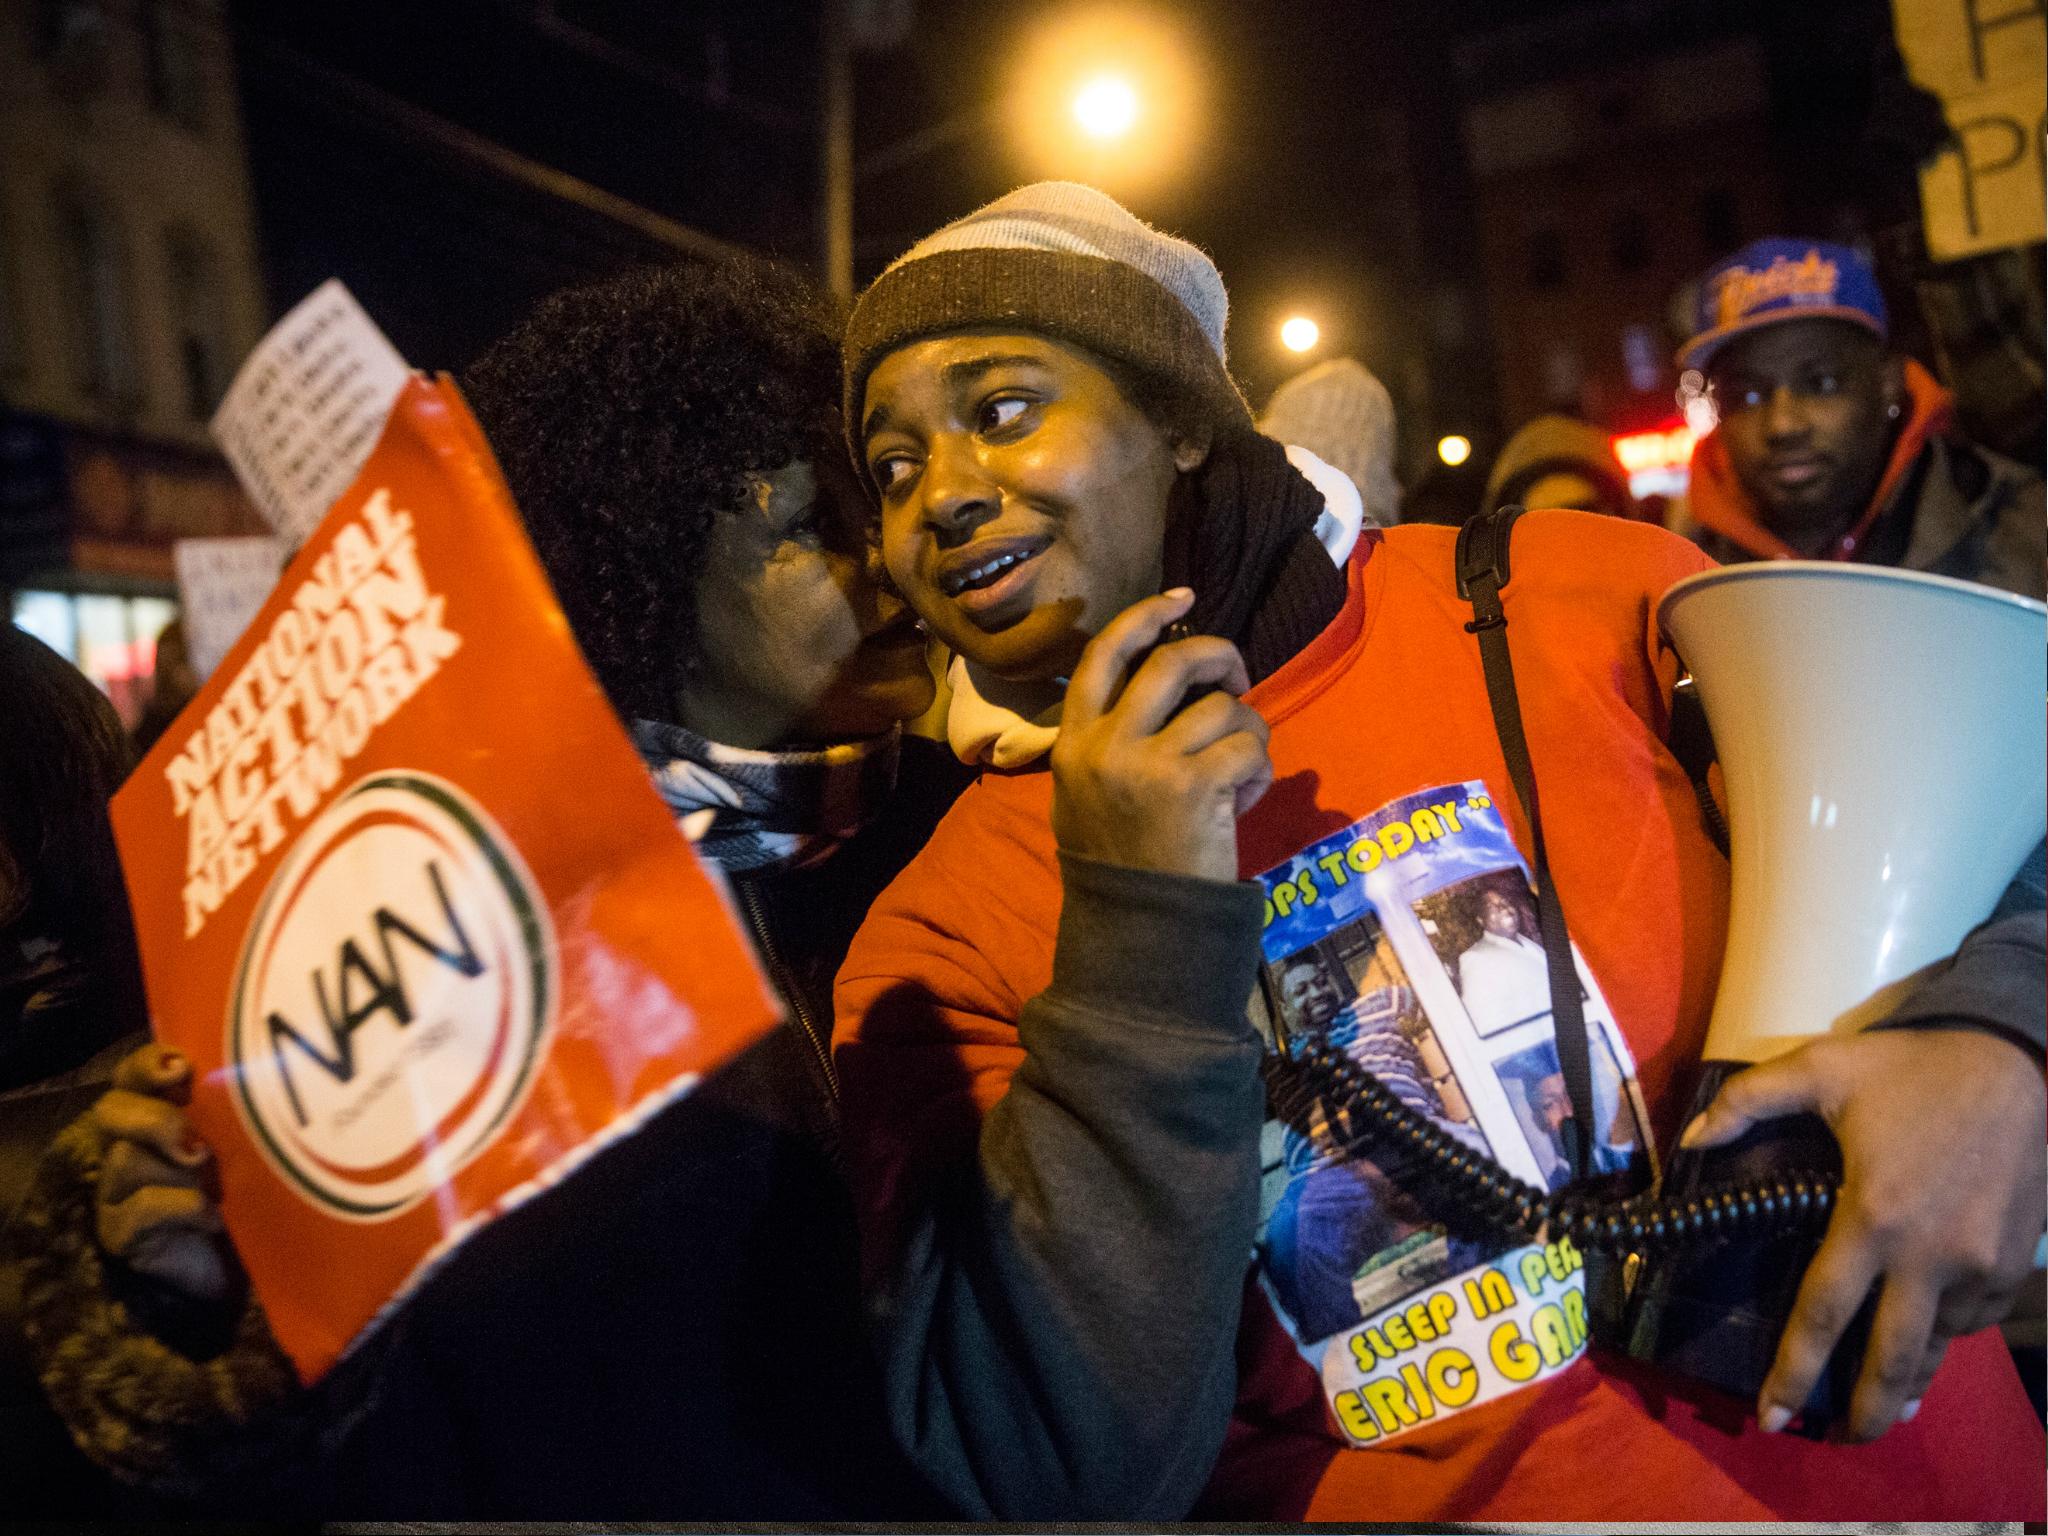 Activist Erica Garner, daughter of Eric Garner who died after police put him in a chokehold in 2014, has died a week after suffering a massive heart attack.